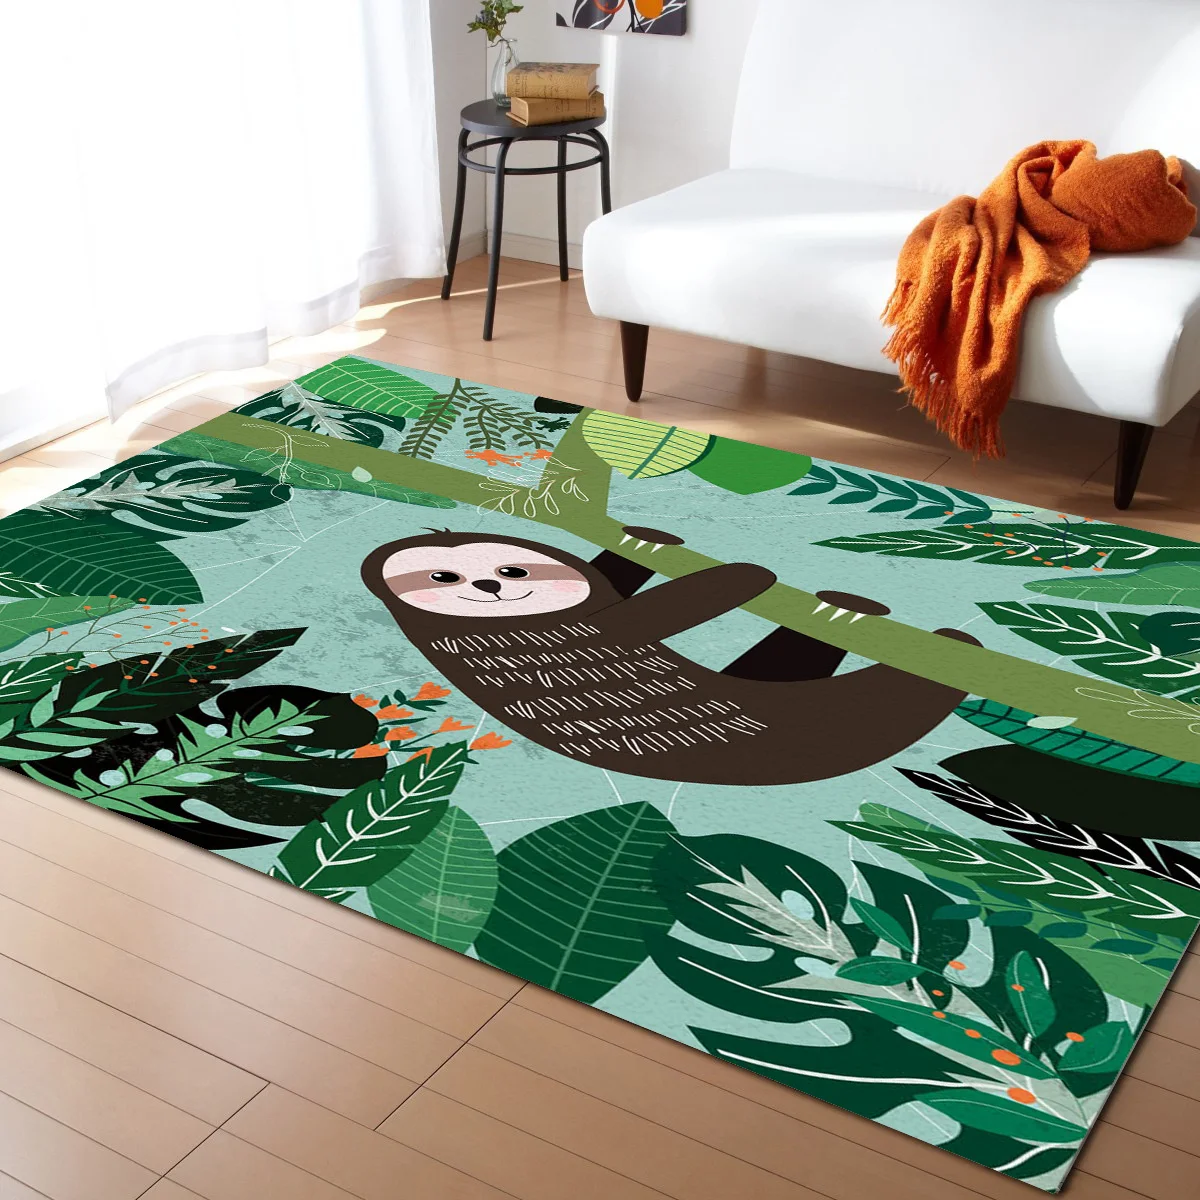 Sloth Leaf Trunk Animal Paw Flower Plant Carpets for Bedroom Modern Area Rugs for Living Room Home Hotel Decor Printed Large Mat